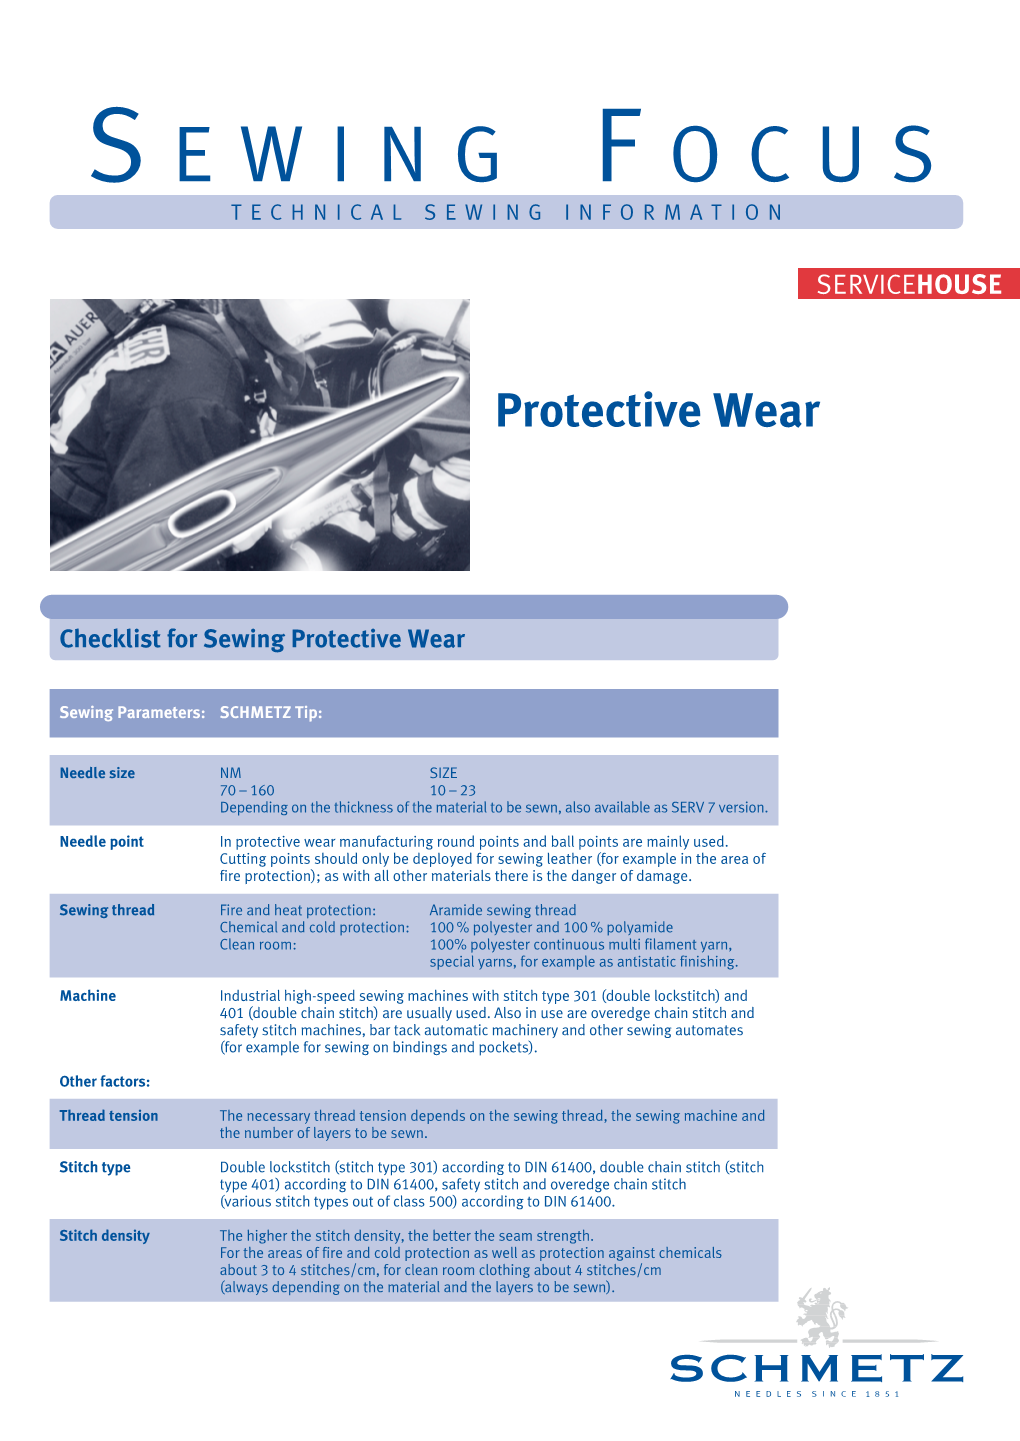 Sewing Focus Protective Wear